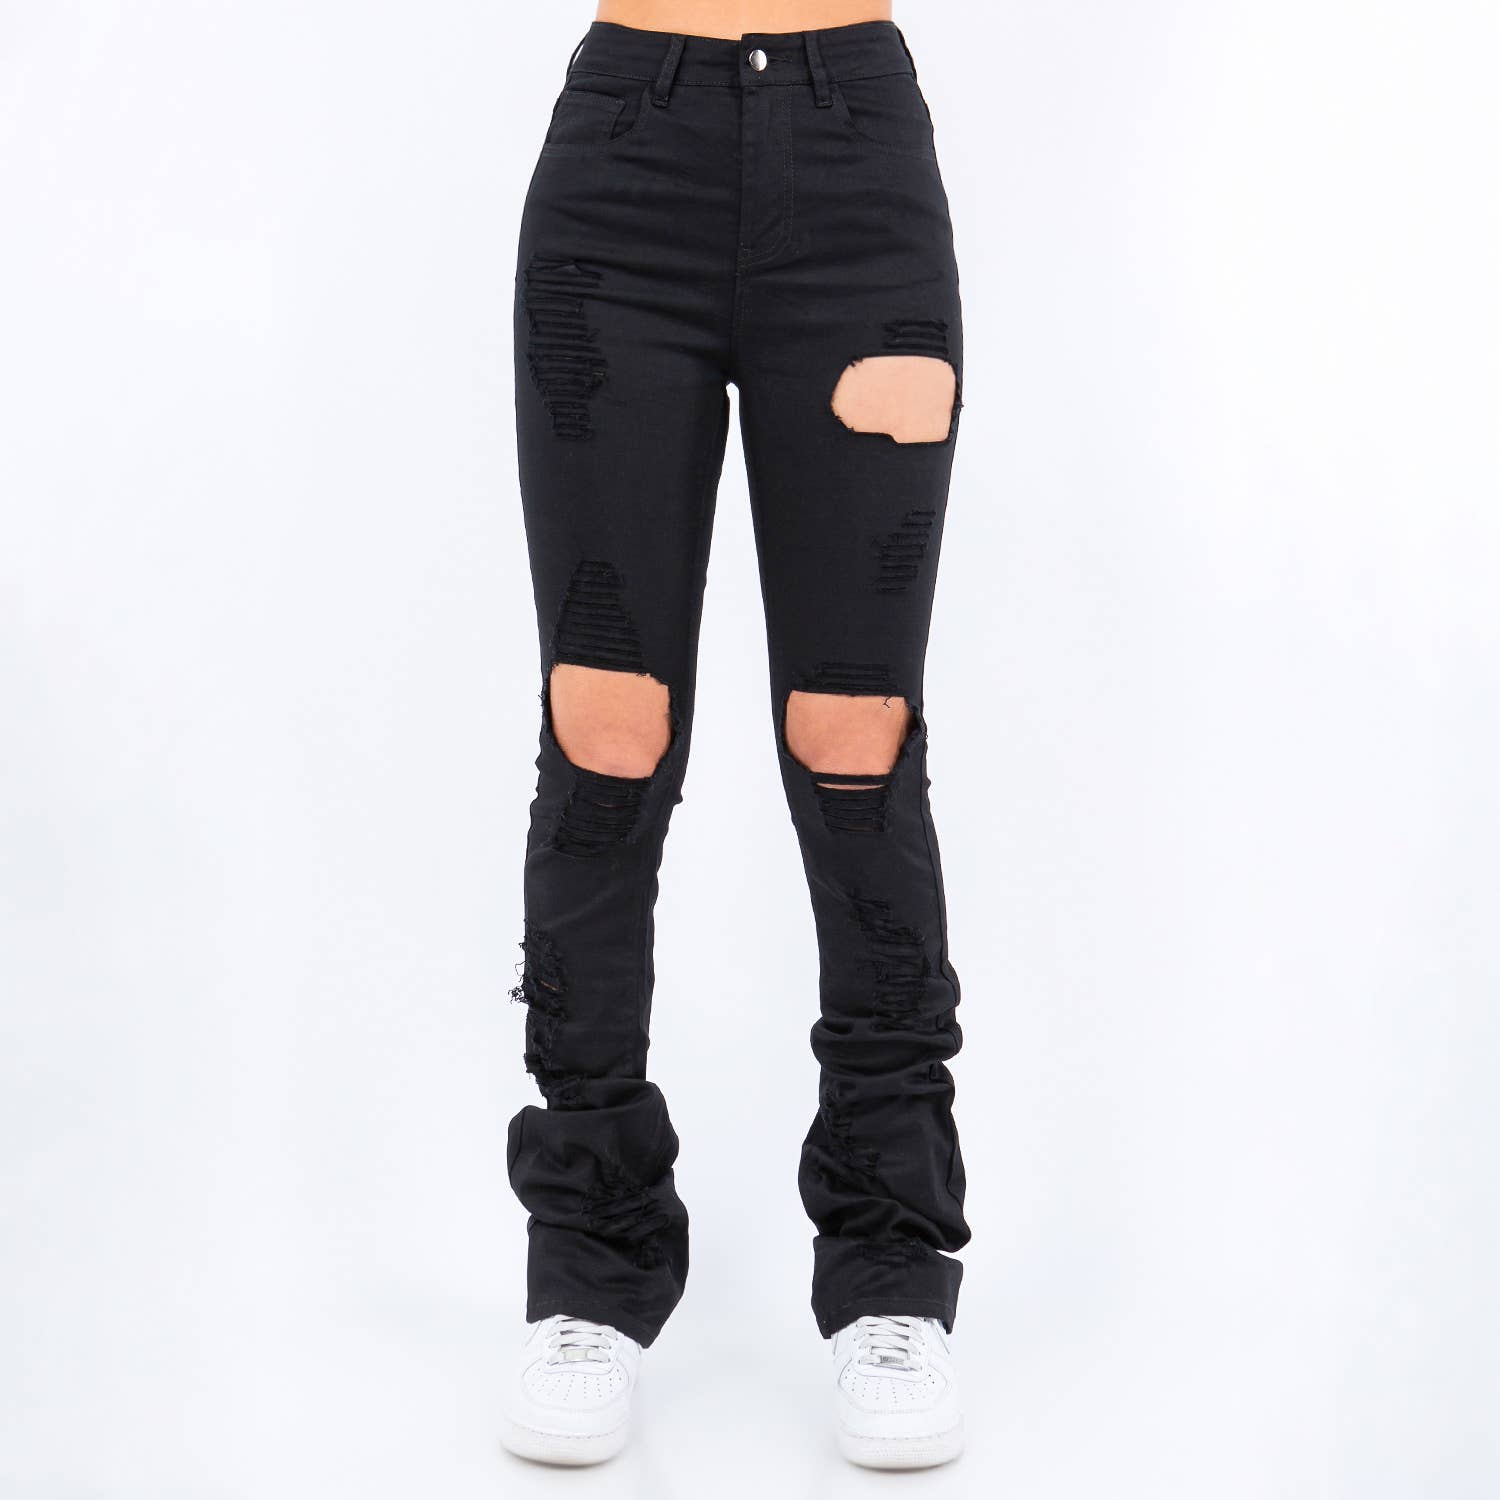 Women's Ladies Leah Stone PU Coated Faux Leather High Waist Going Out  Leggings